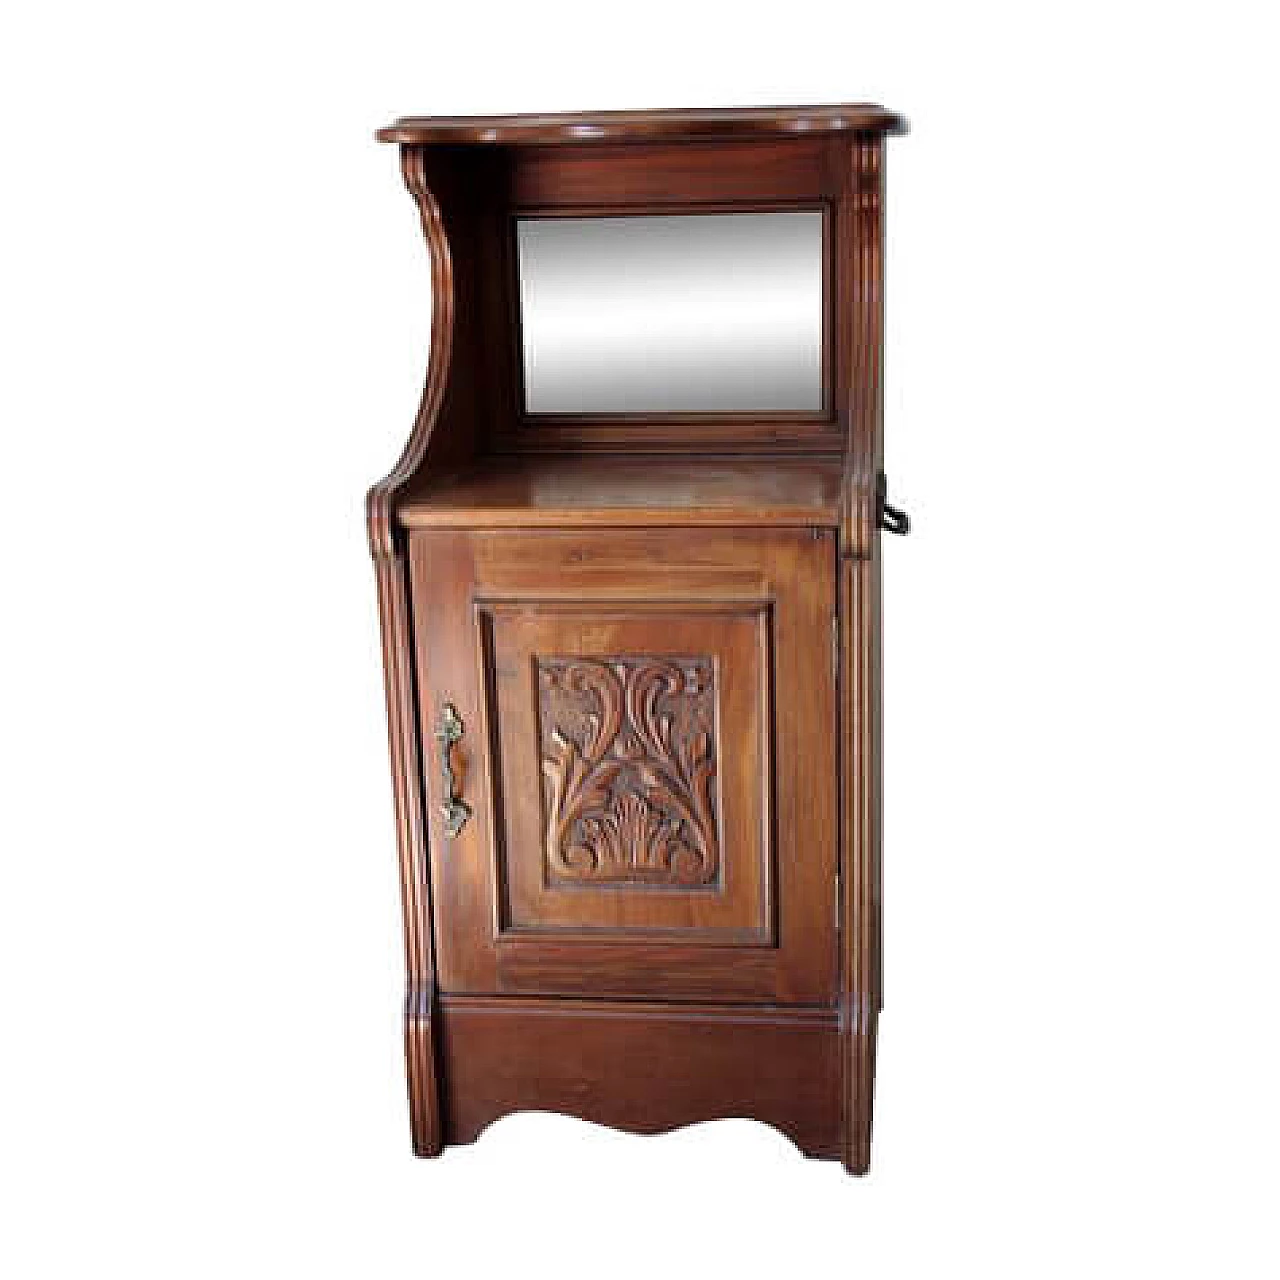 Antique English bedside table in mahogany, 19th century 1143208